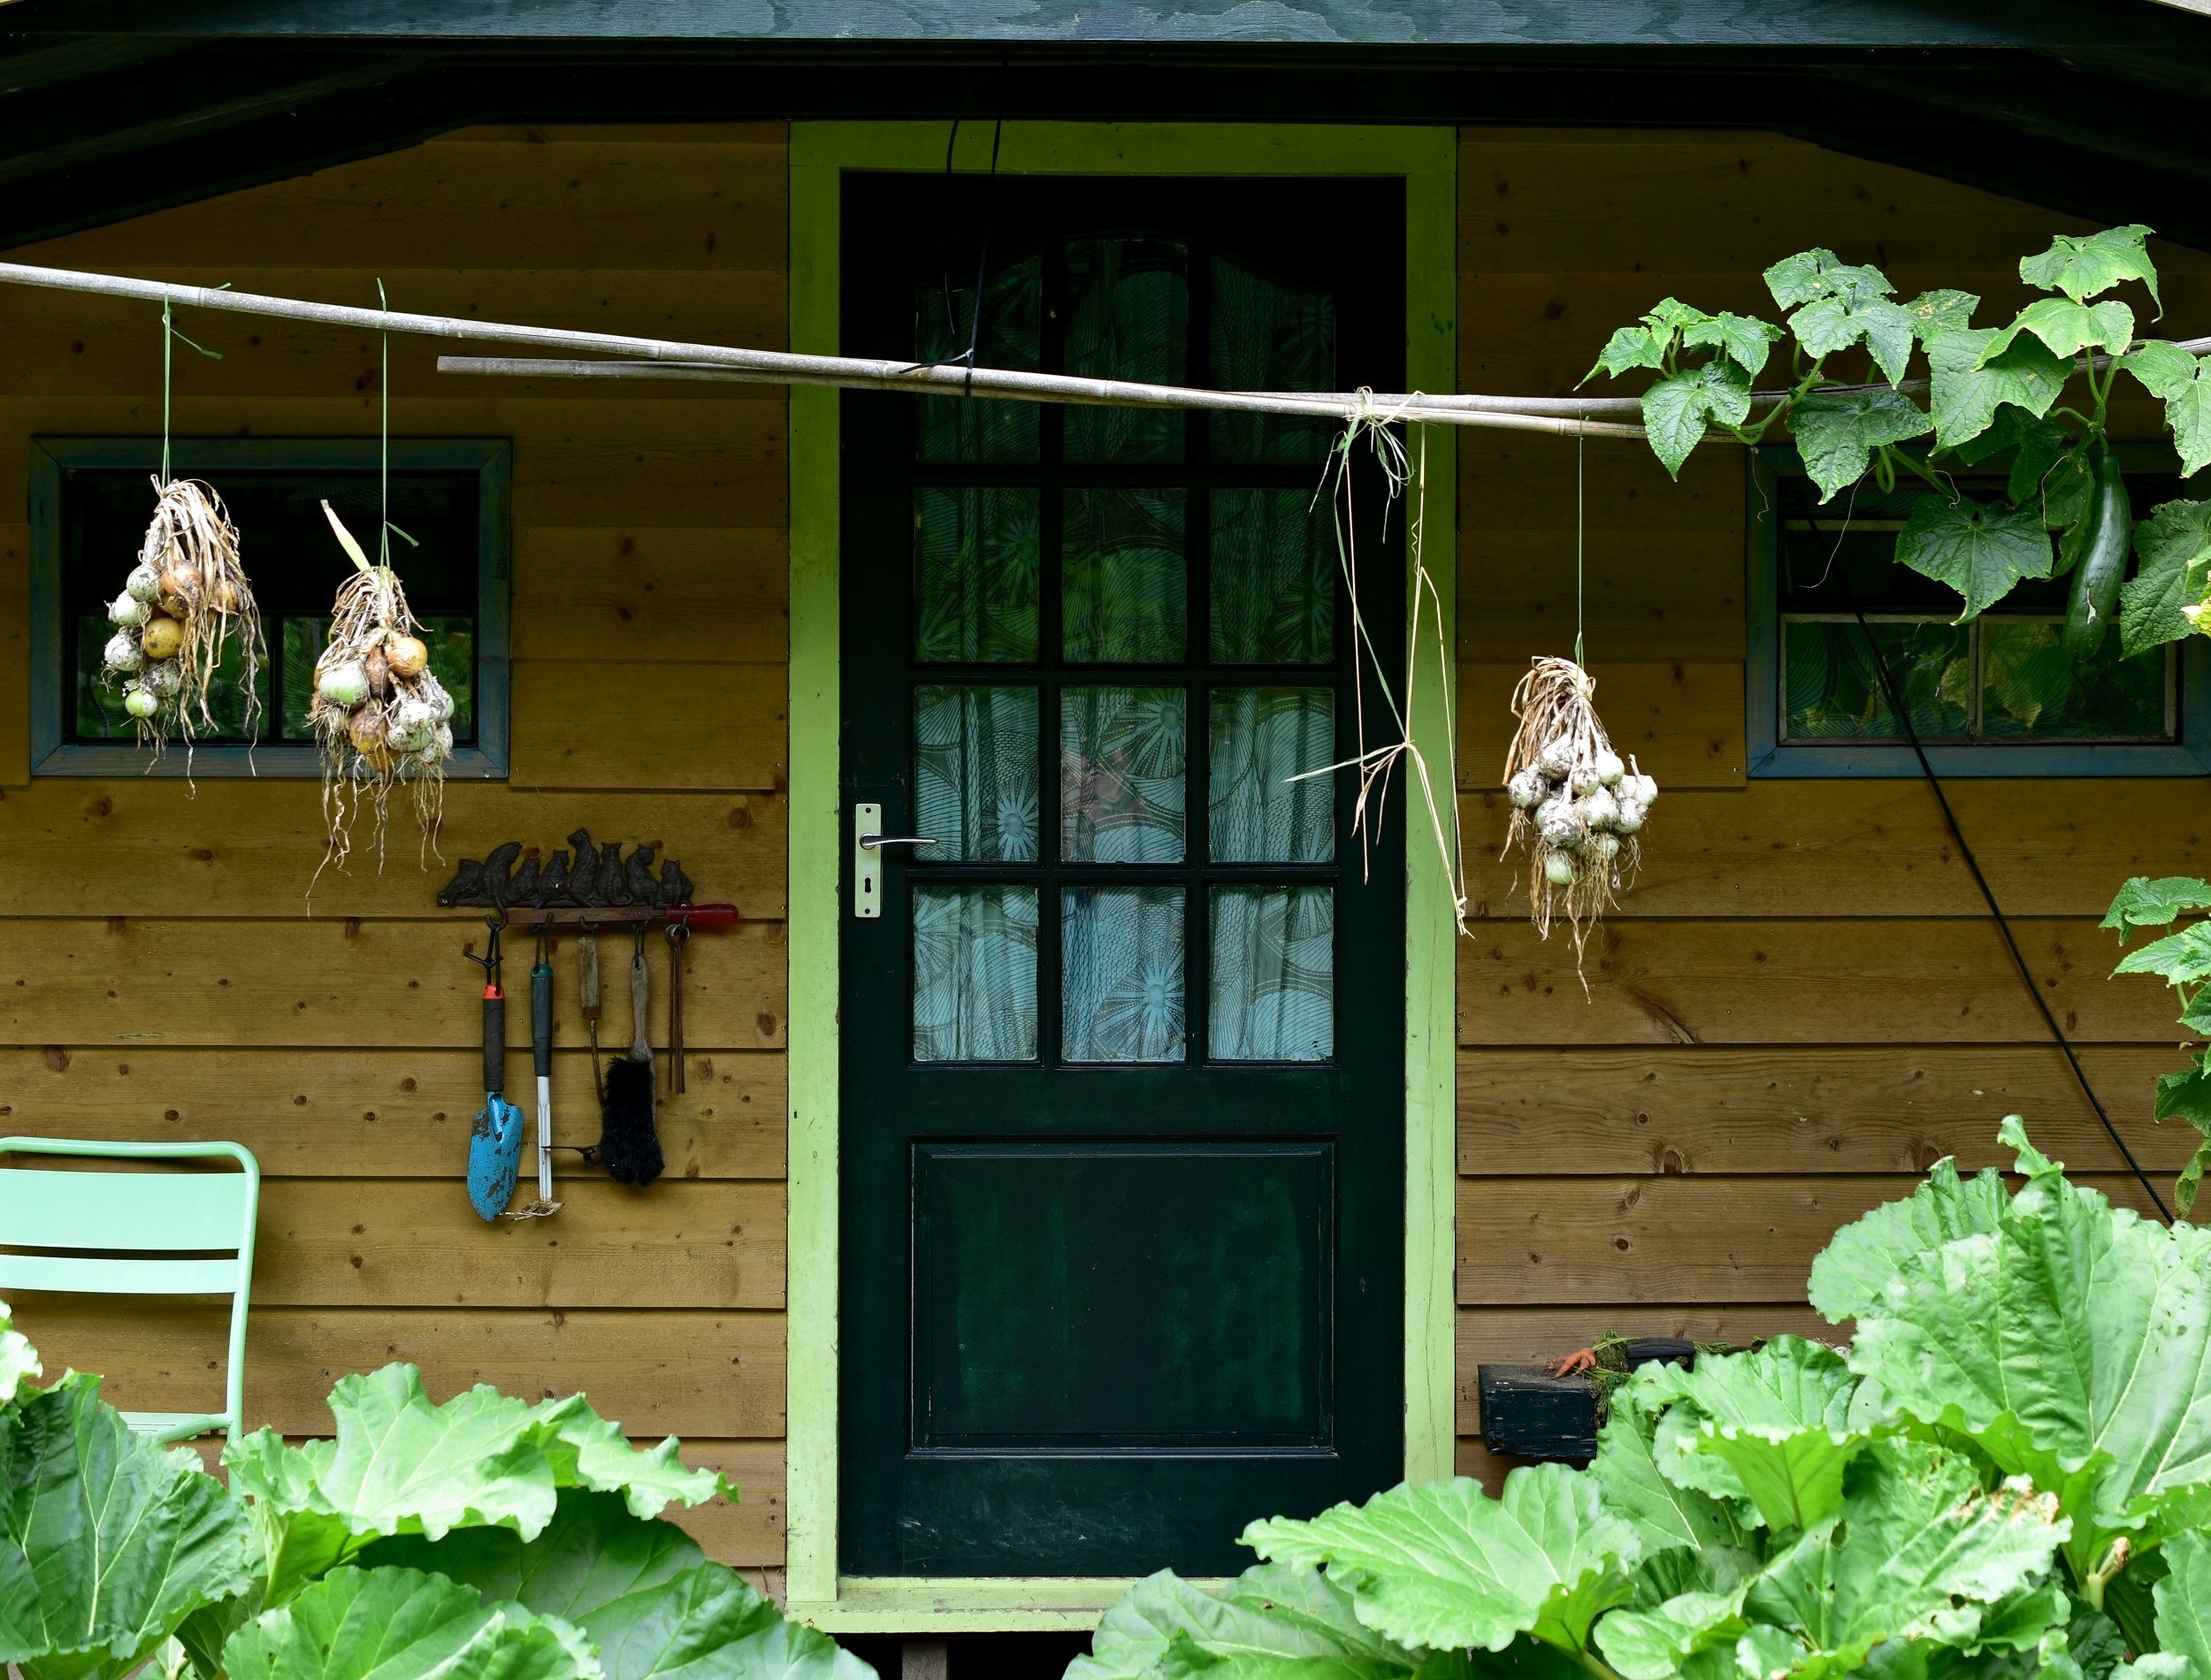 Garlic hanging outside of home with green vines growing all around